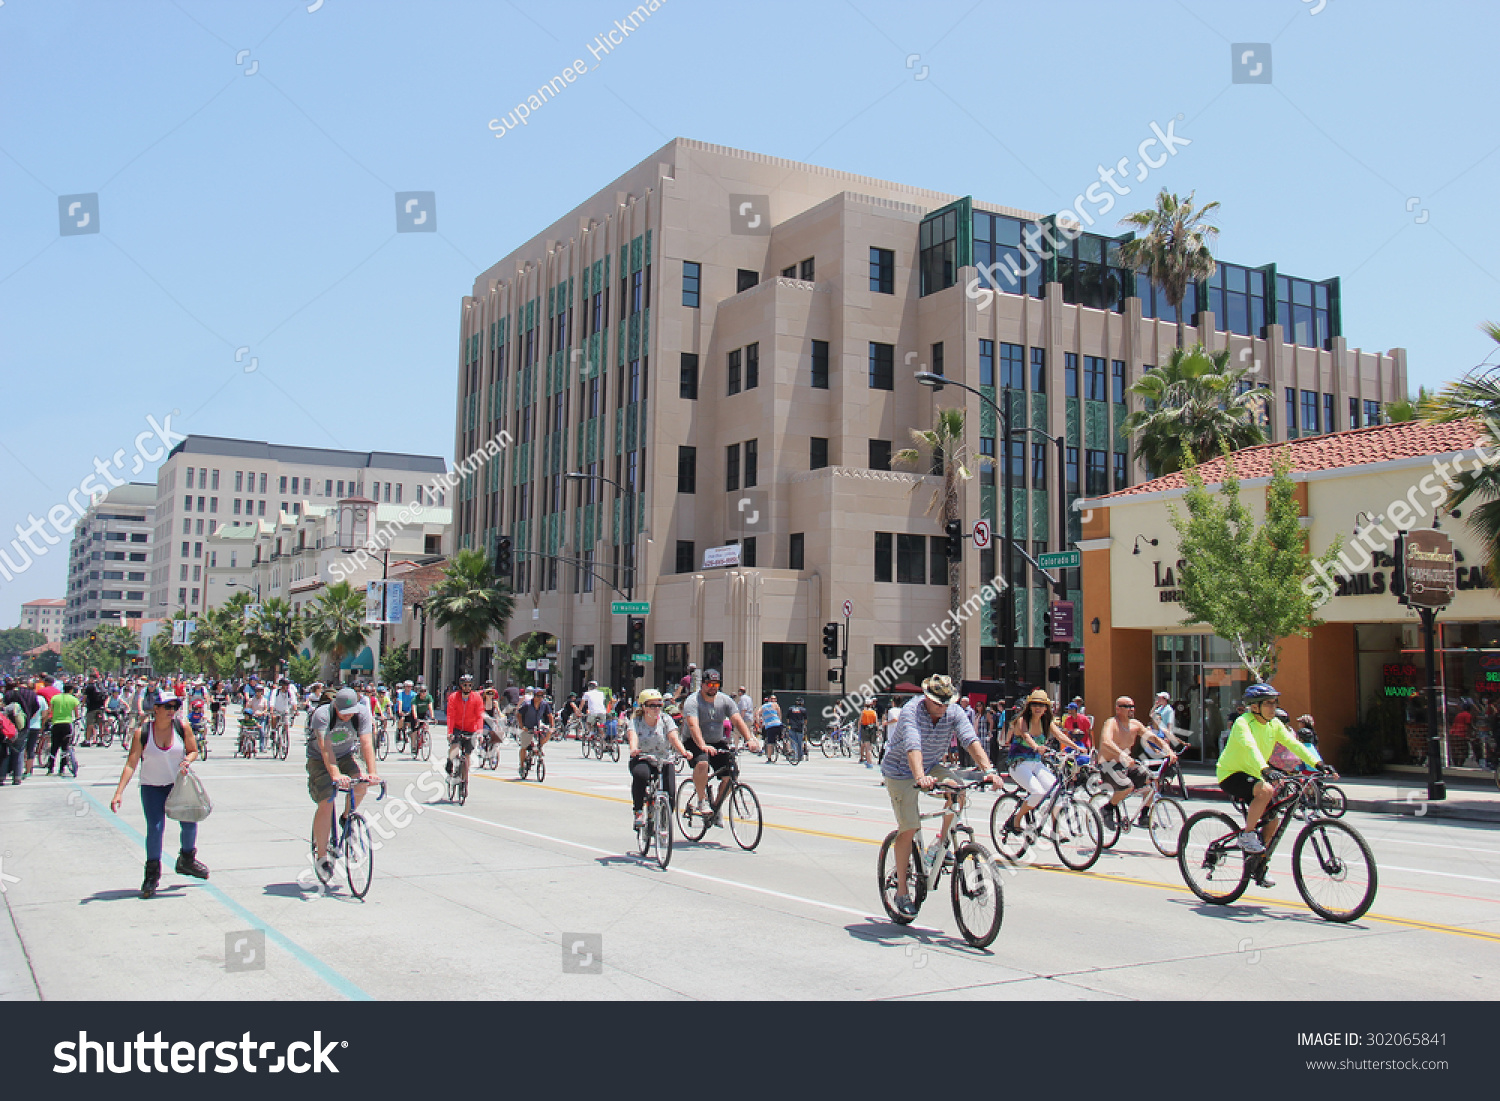 Boden Sweden July 13 2015 Downtown Stock Photo 515472226 